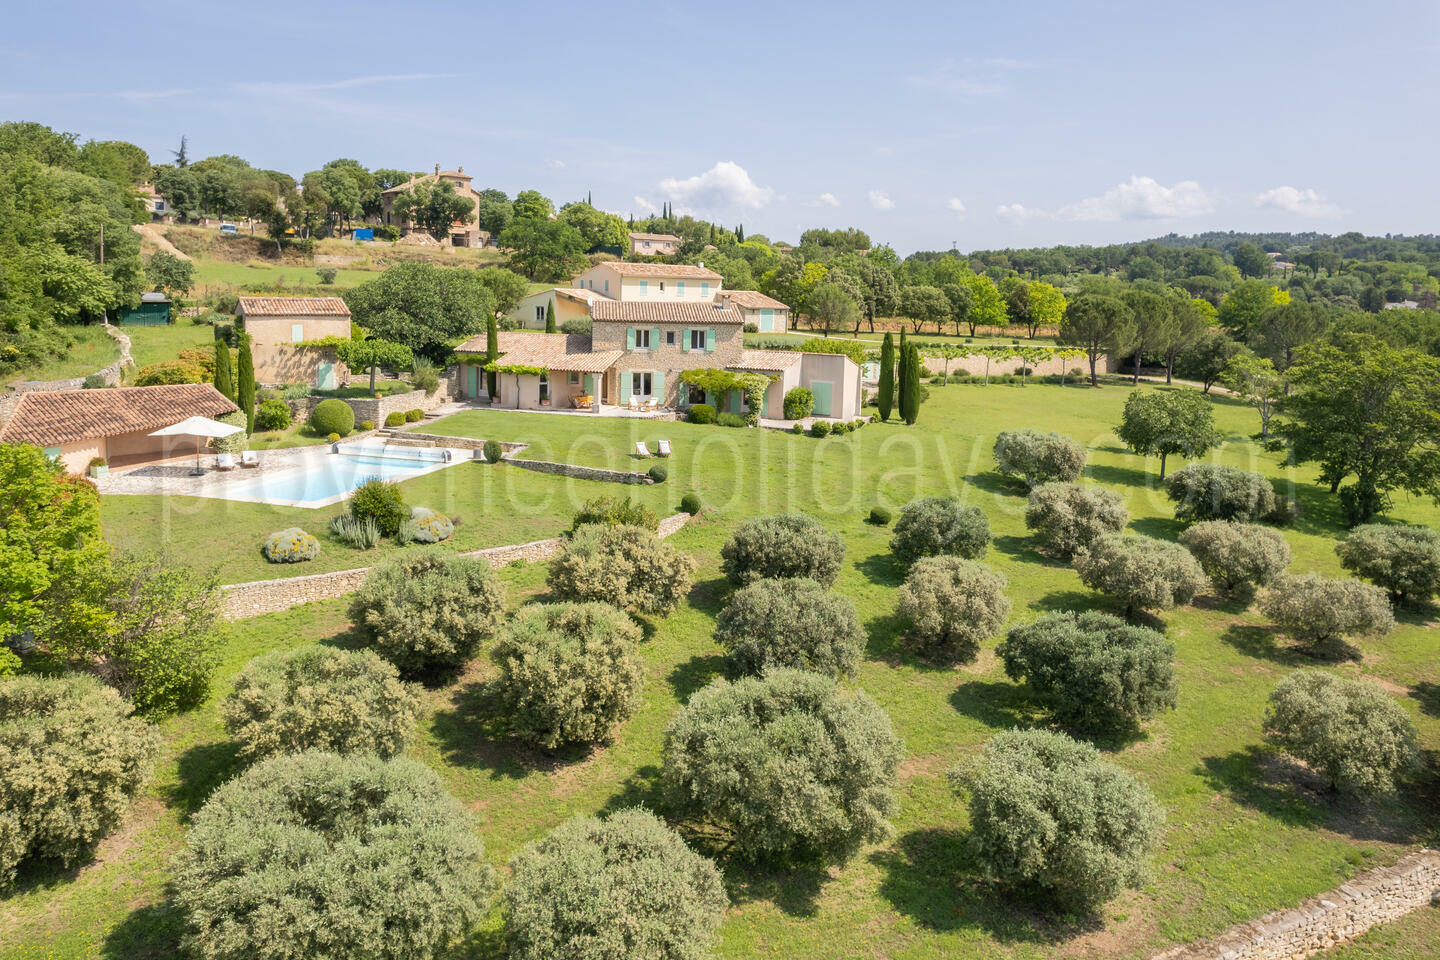 Stylish Villa with a Heated Pool and a Shaded Terrace 1 - Villa Goult: Villa: Exterior